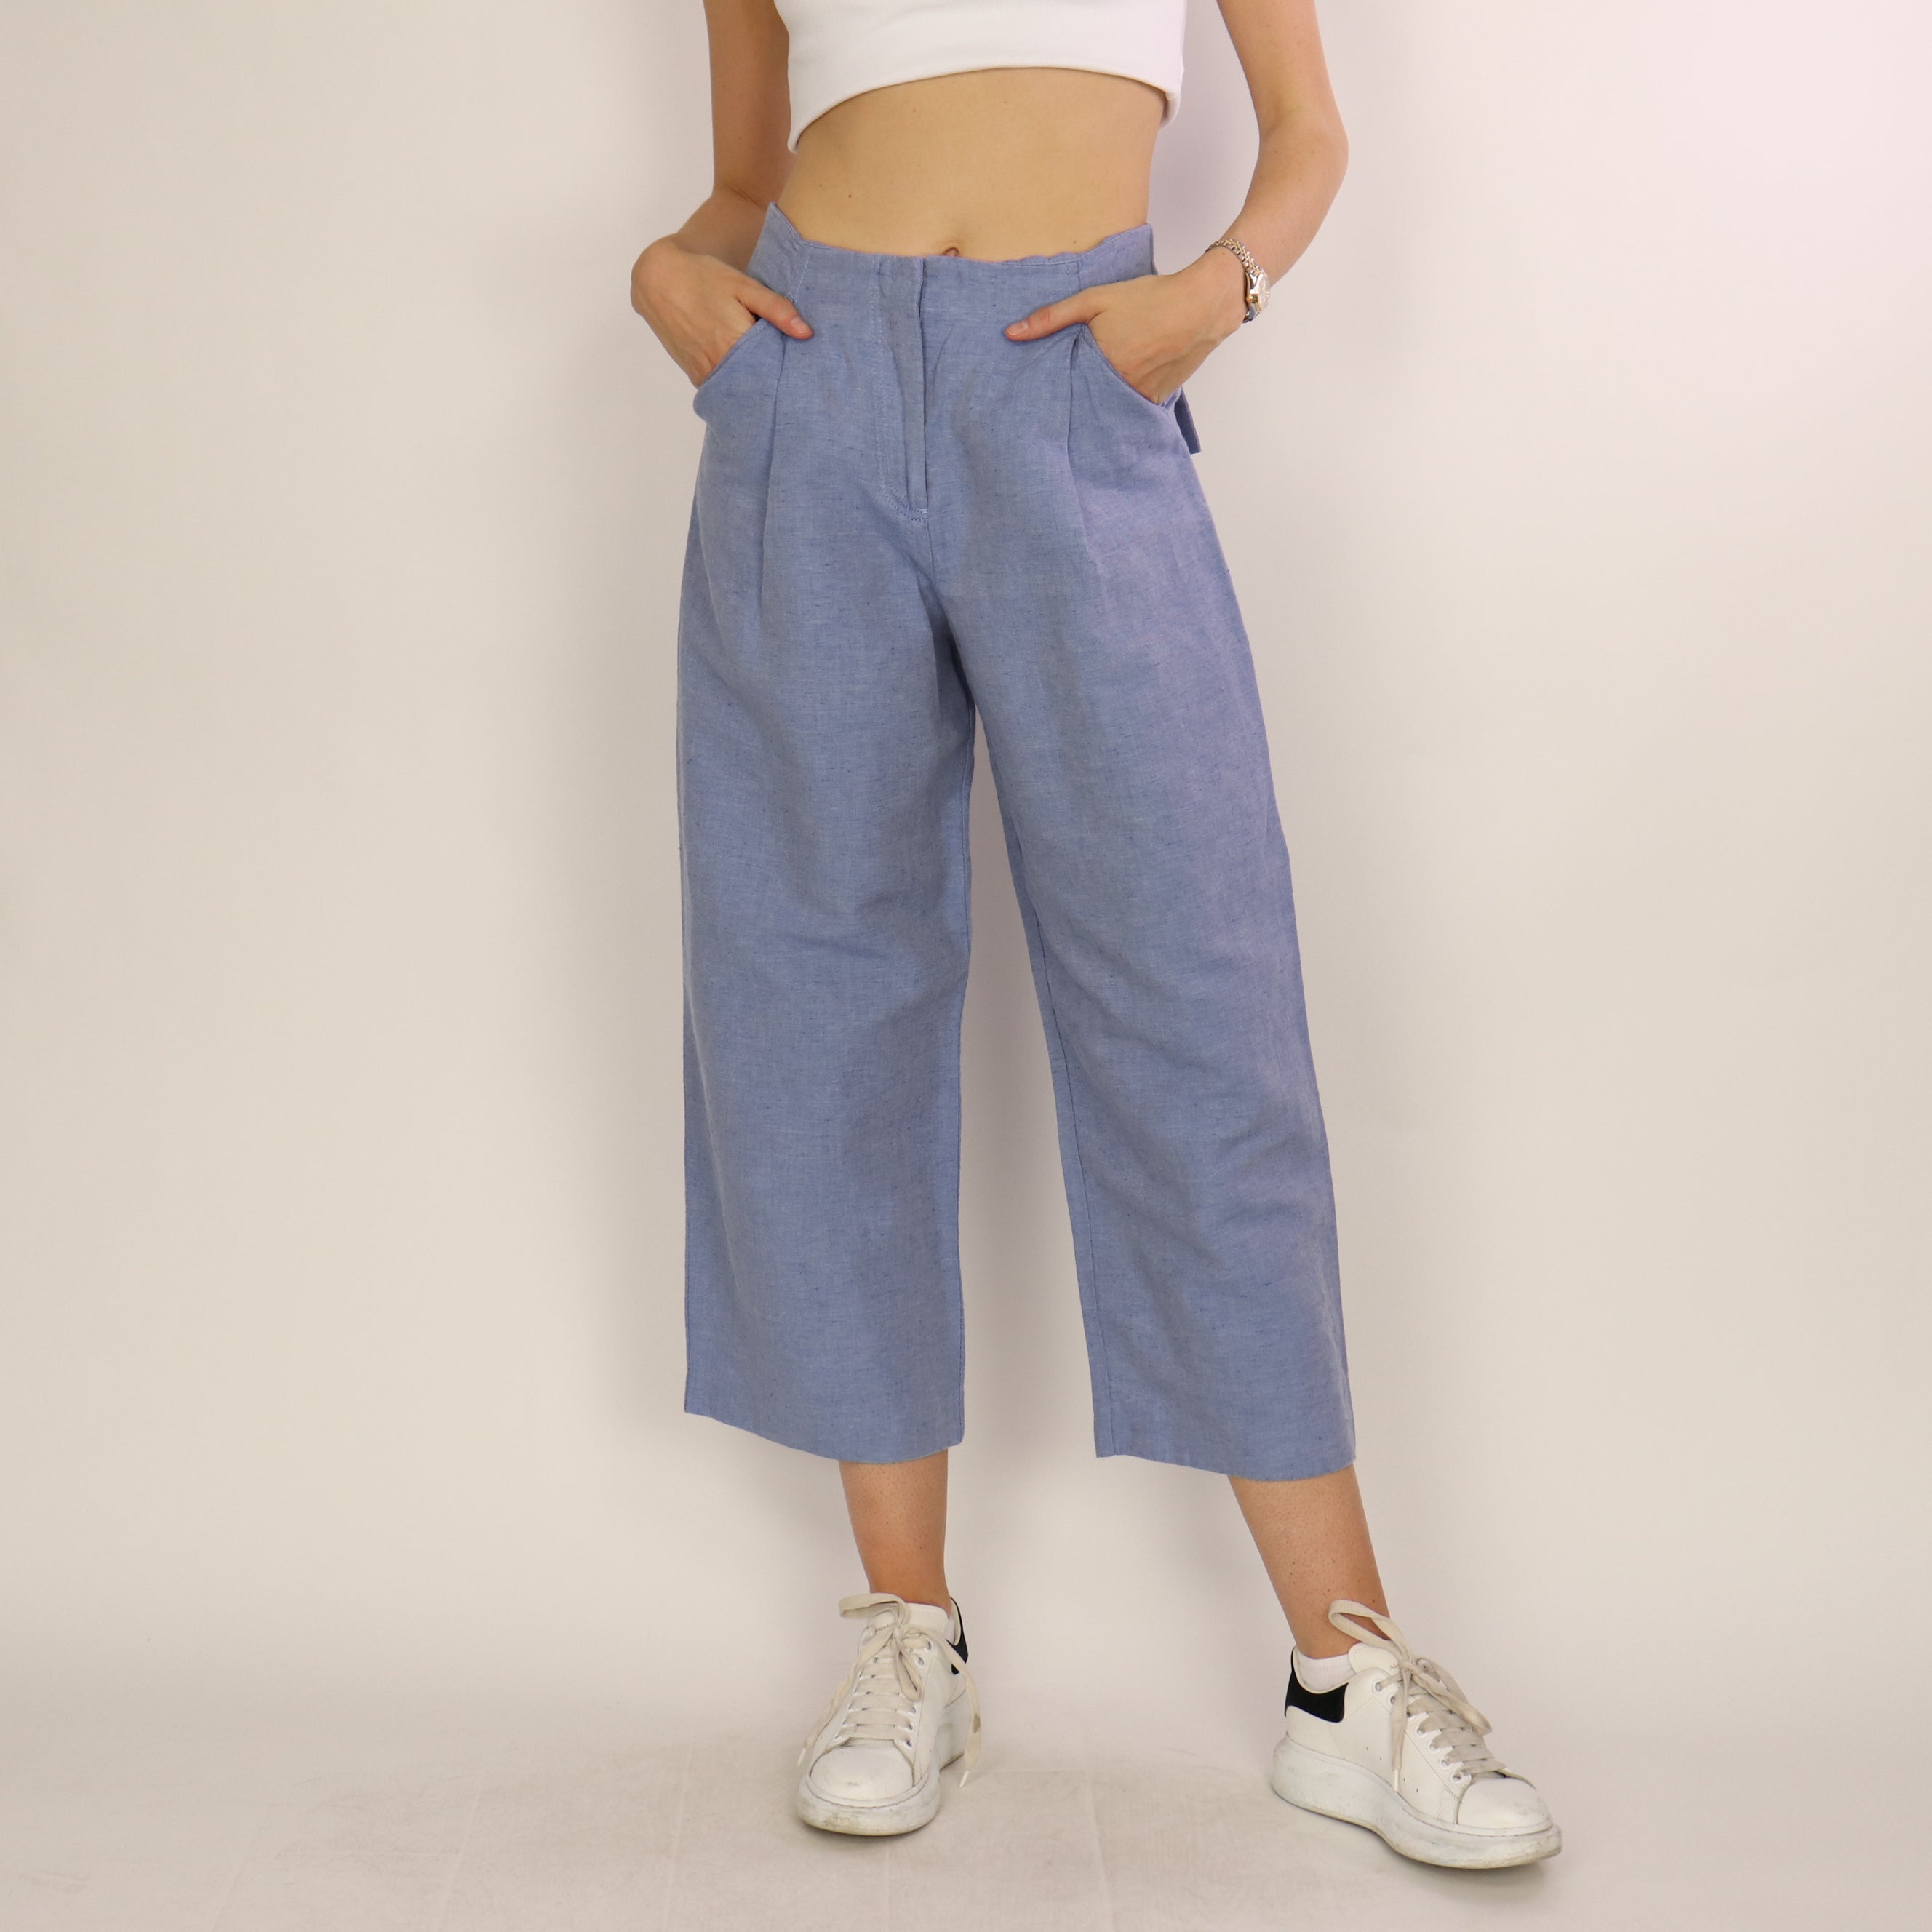 Trousers, Size 10